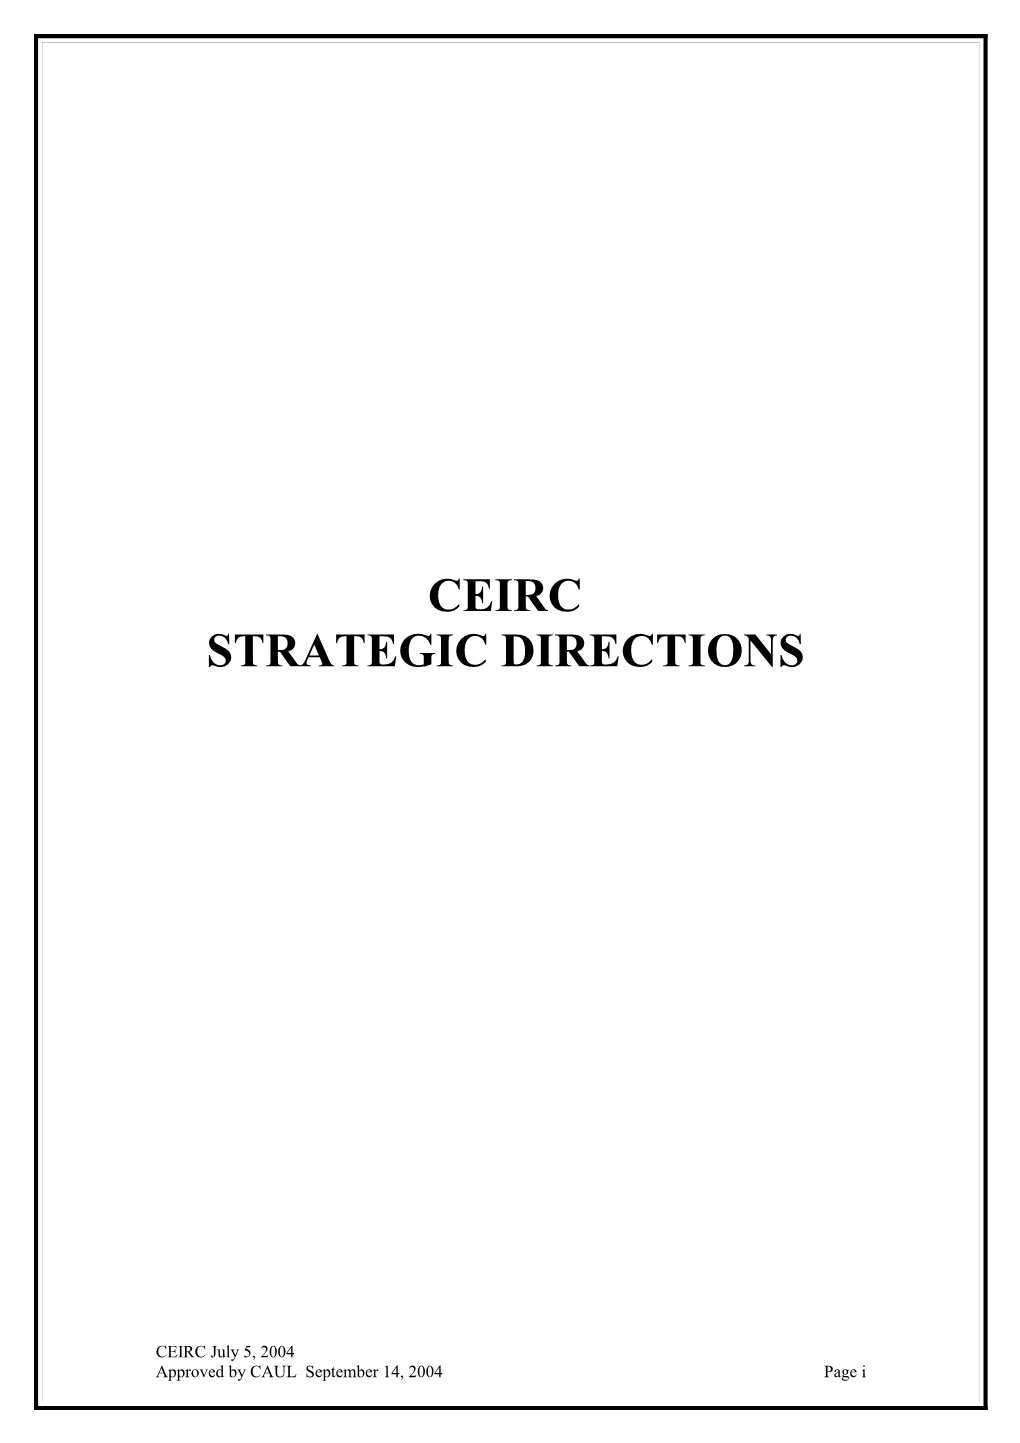 CEIRC Strategic Directions